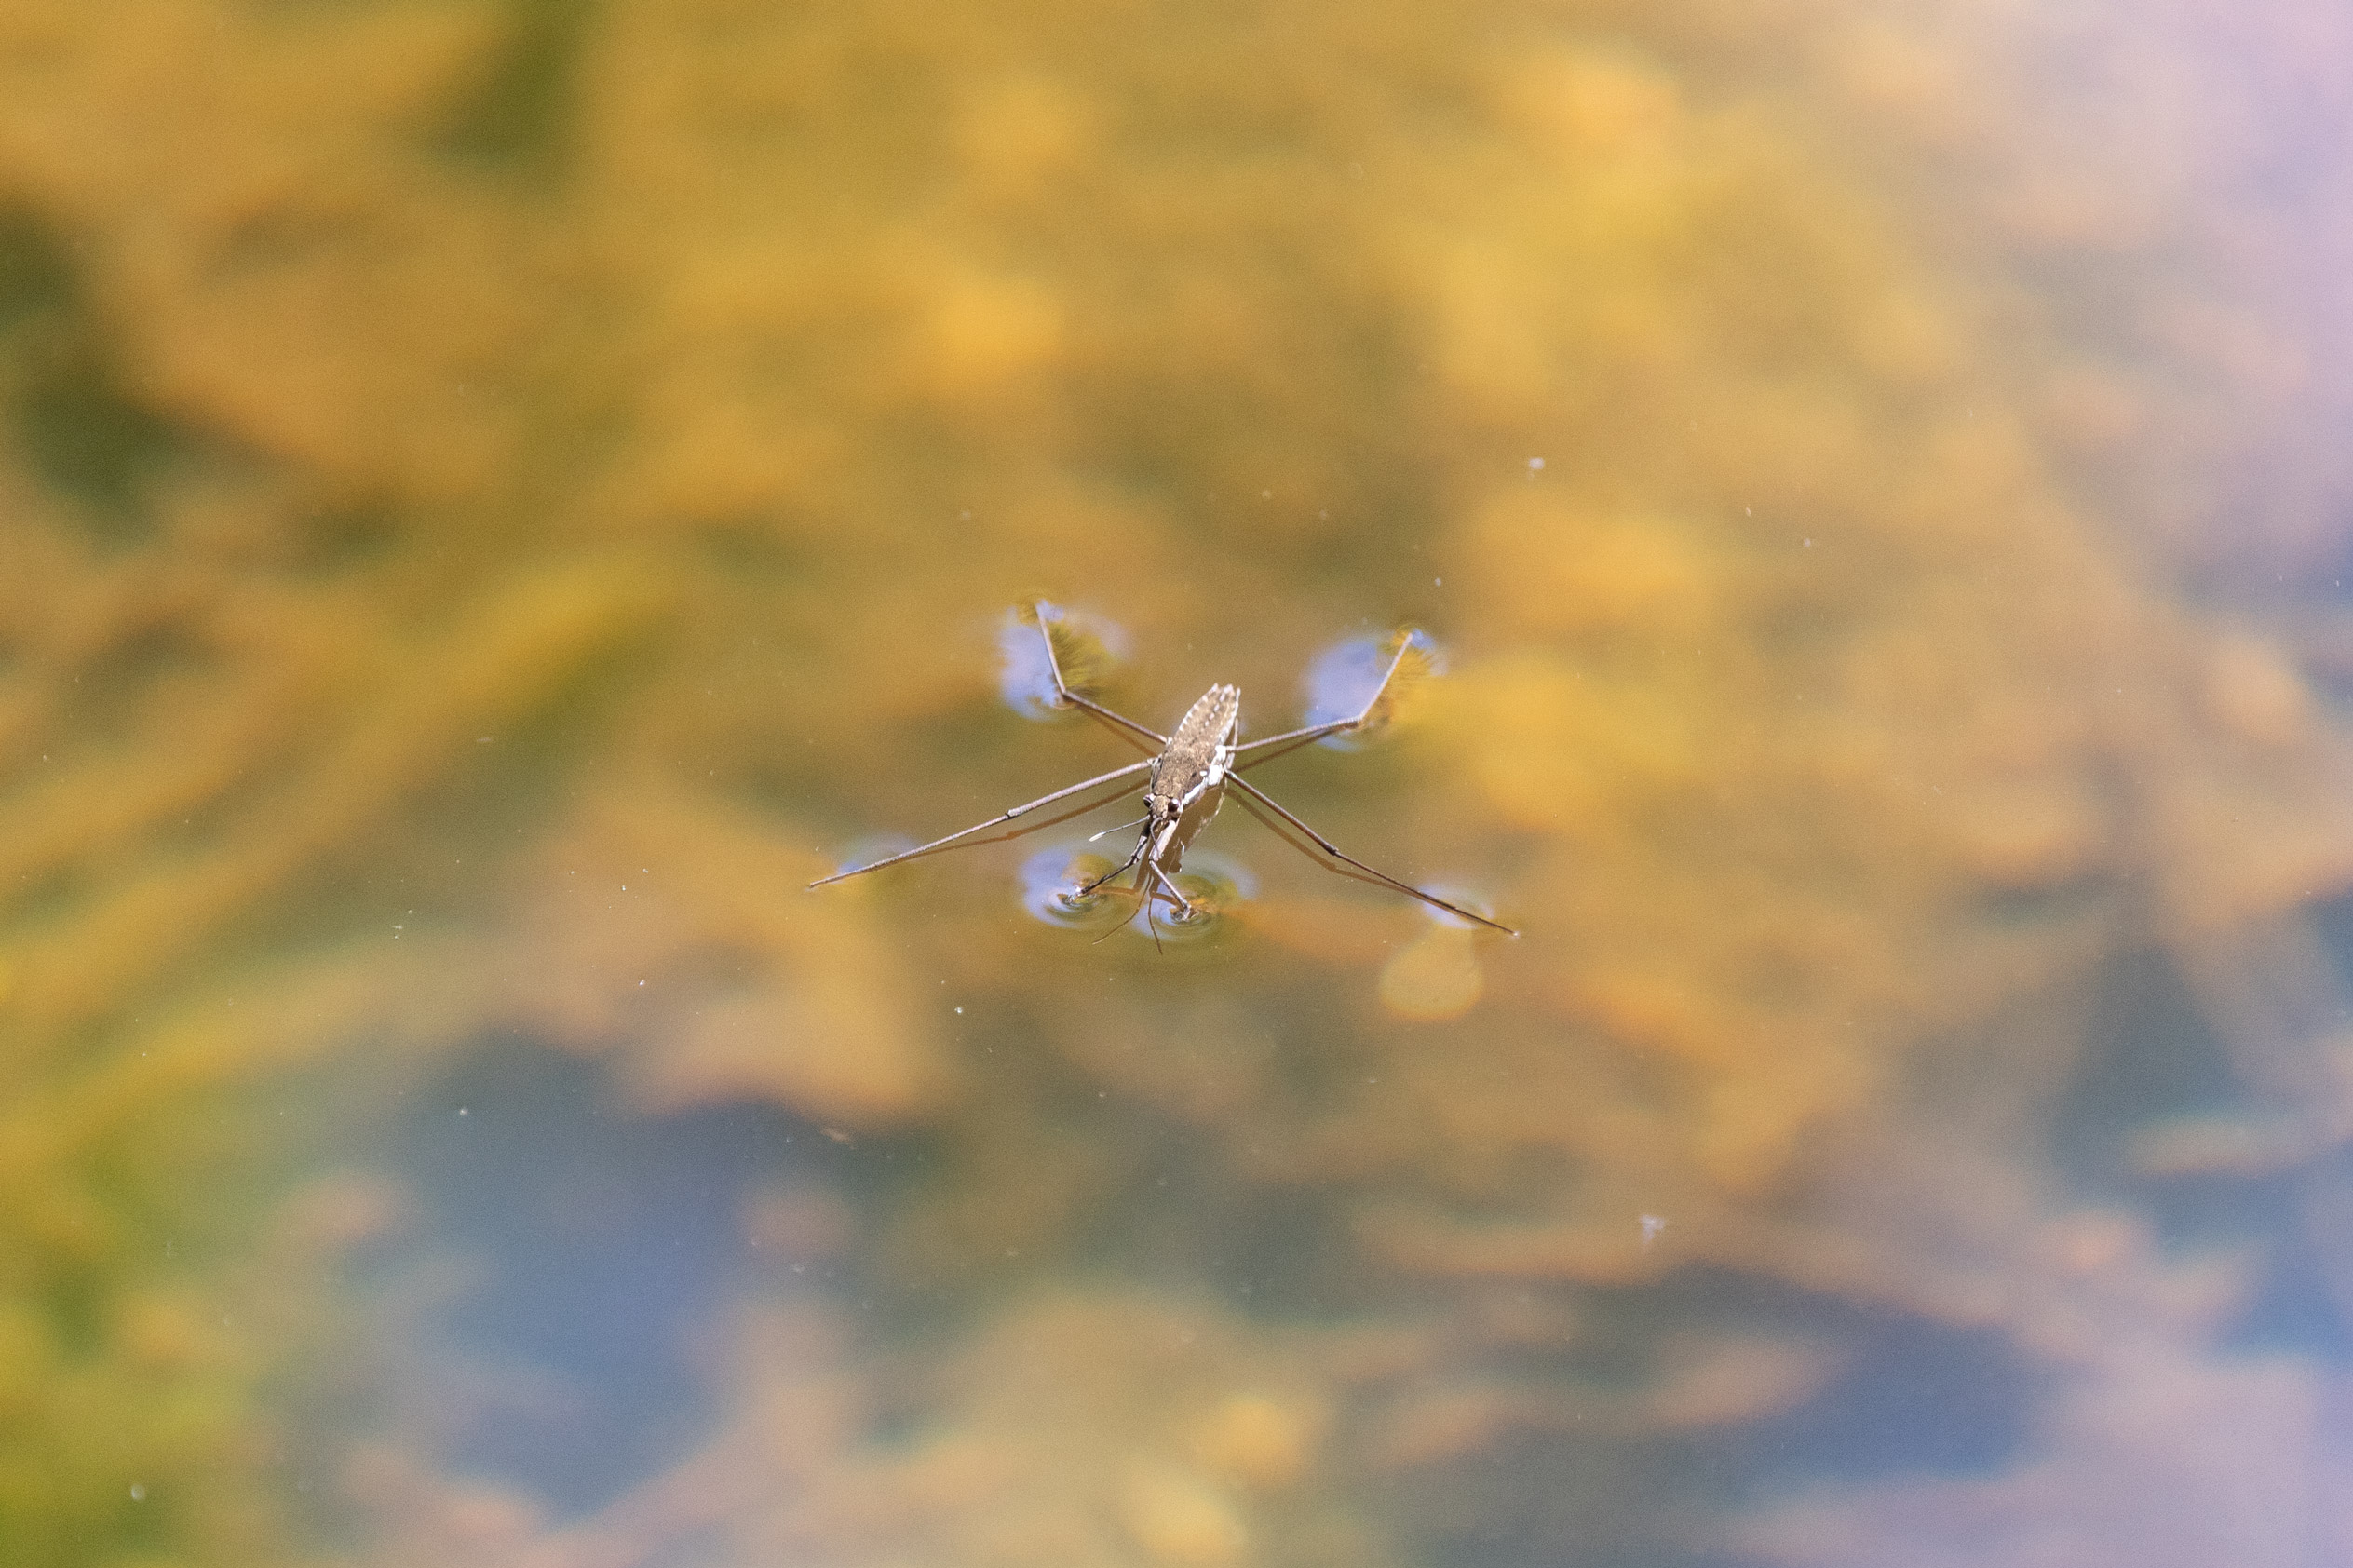 Insect with long limbs standing on water